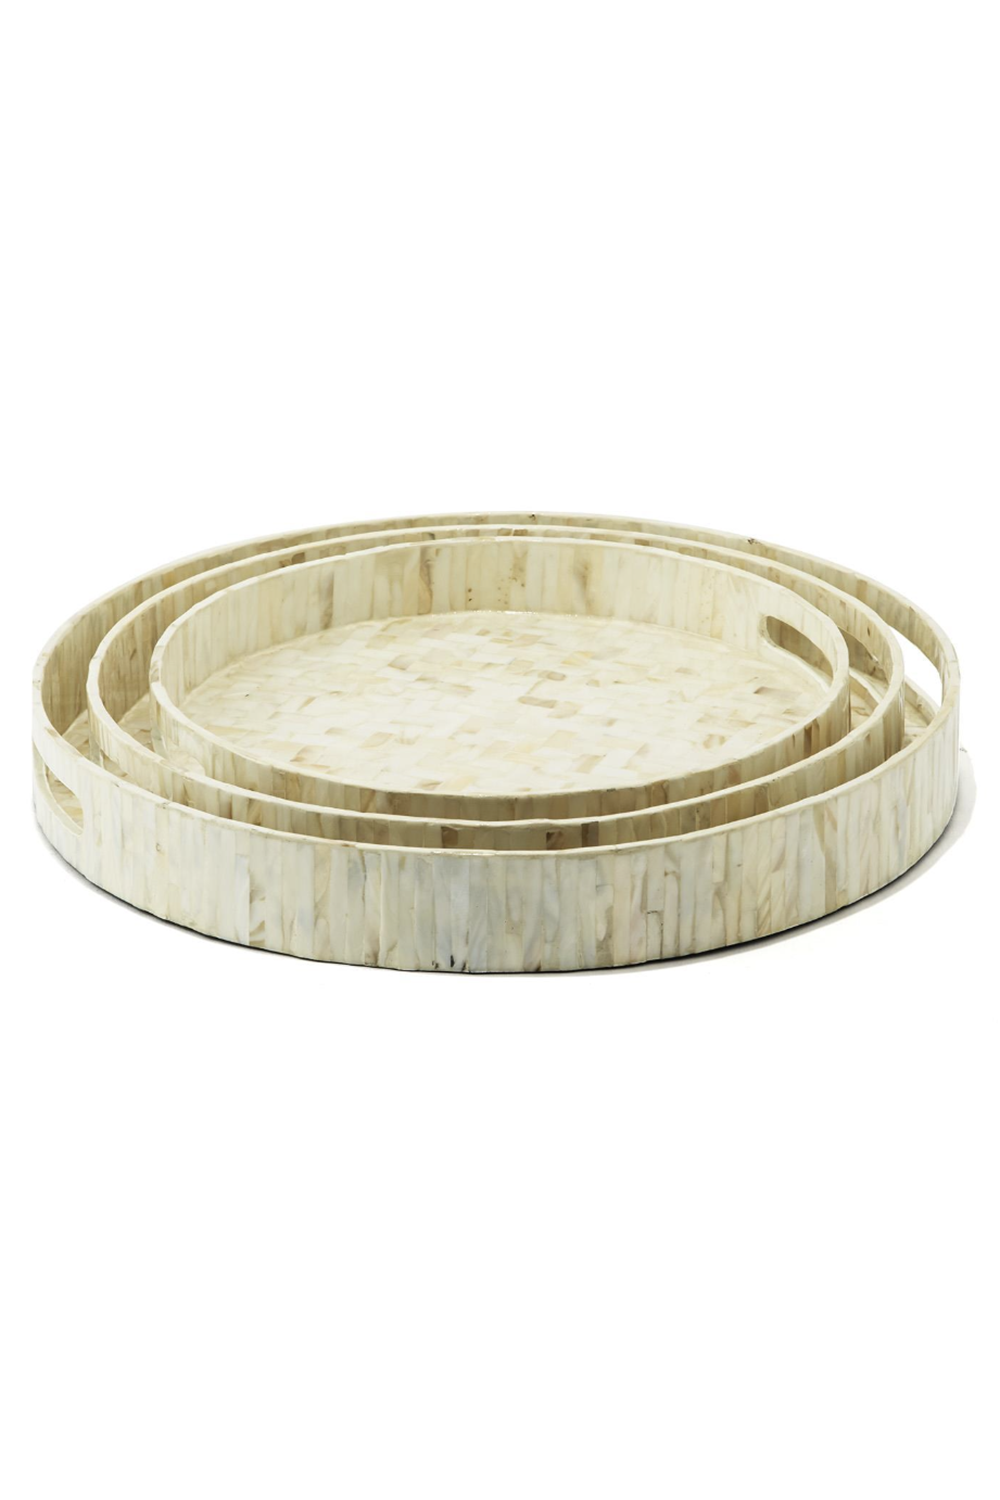 Mother of Pearl Lacquer Tray - Round